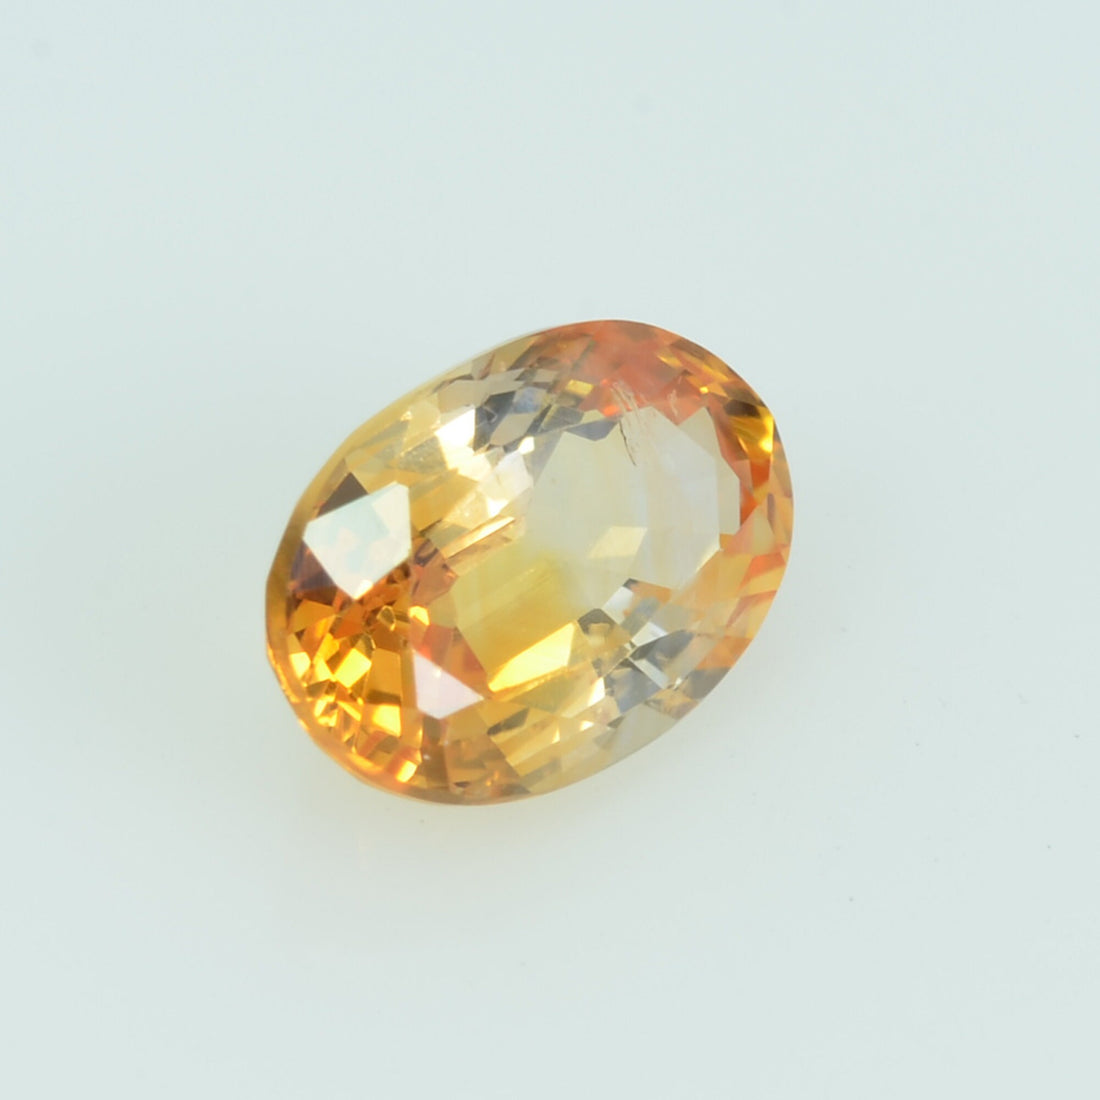 0.63 Cts Natural Yellow Sapphire Loose Gemstone Oval Cut